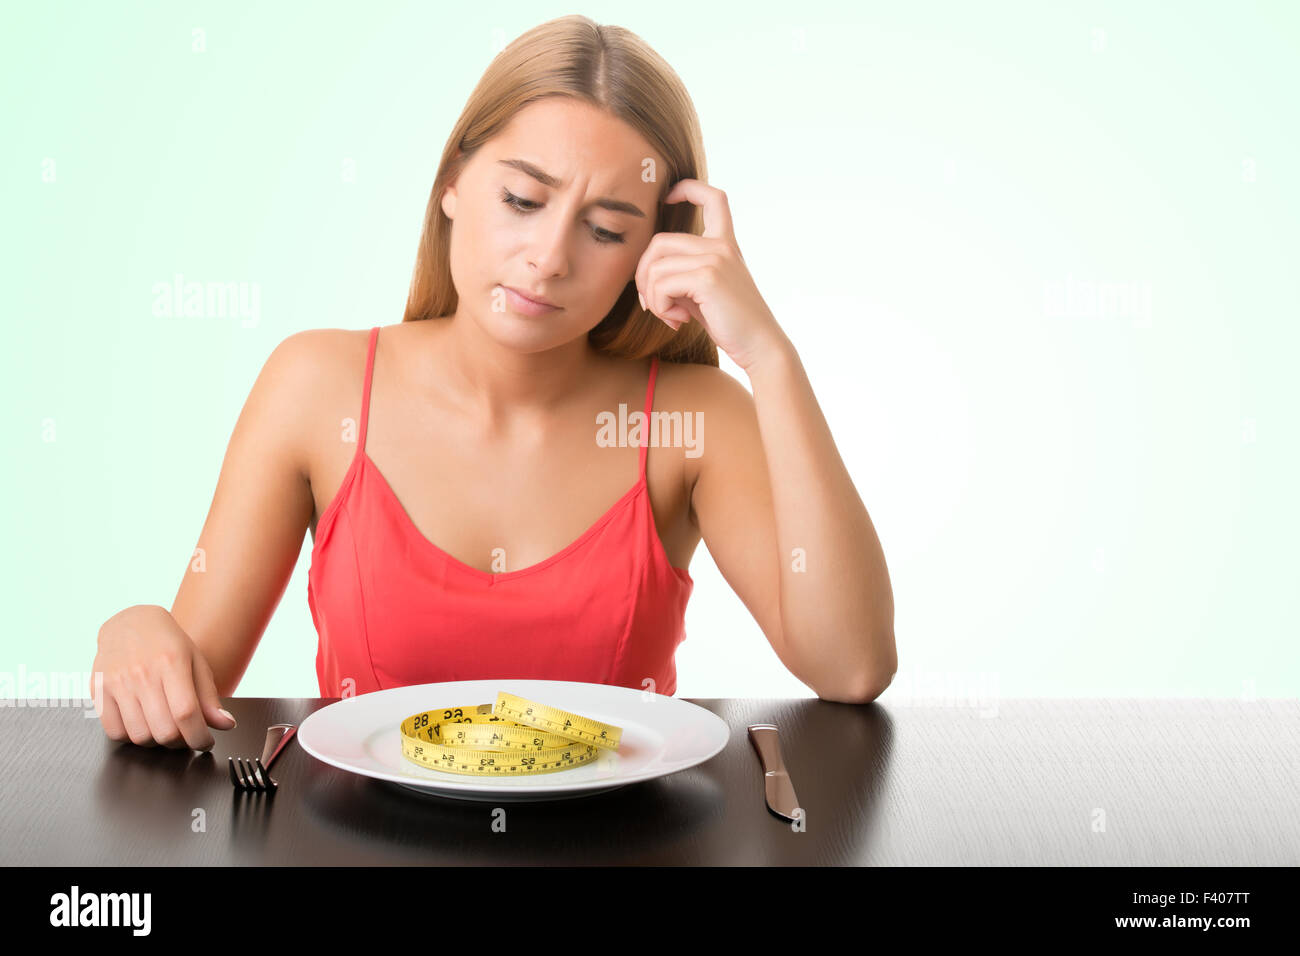 Concept image of a woman on a diet, eating a measuring tape in a green background Stock Photo